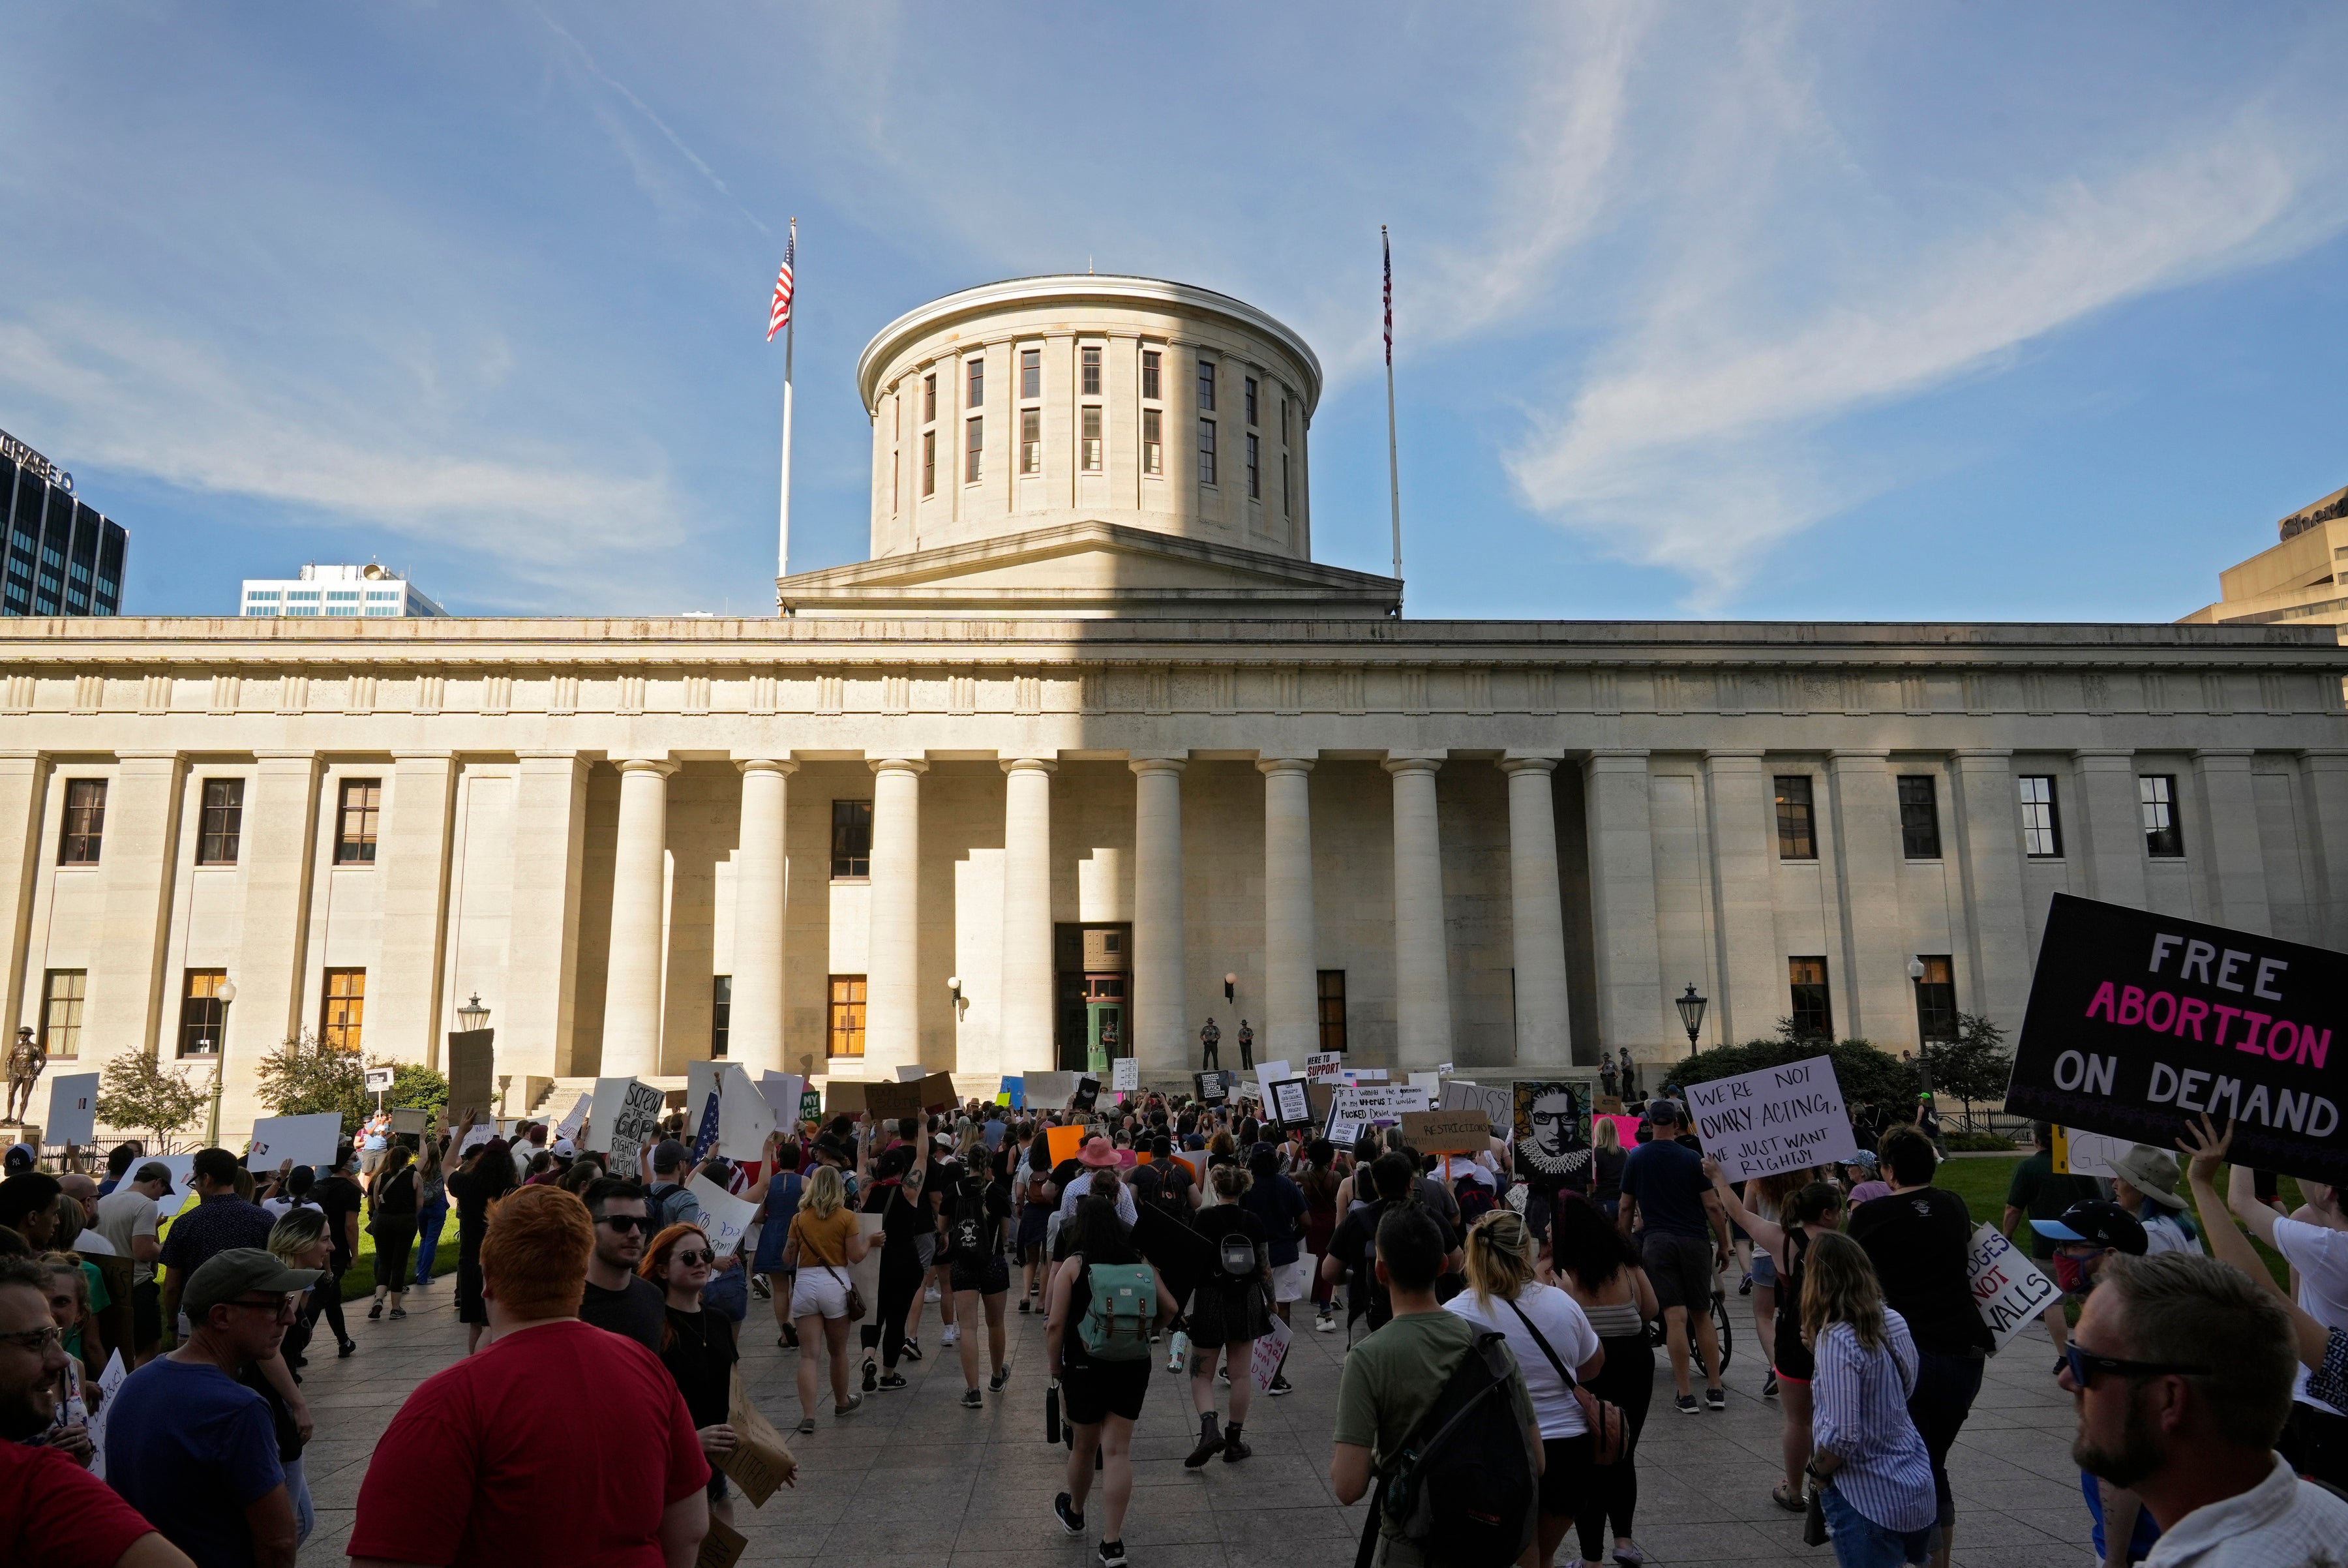 Protesters rally at the Ohio Statehouse in Columbus, Ohio, in support of abortion rights